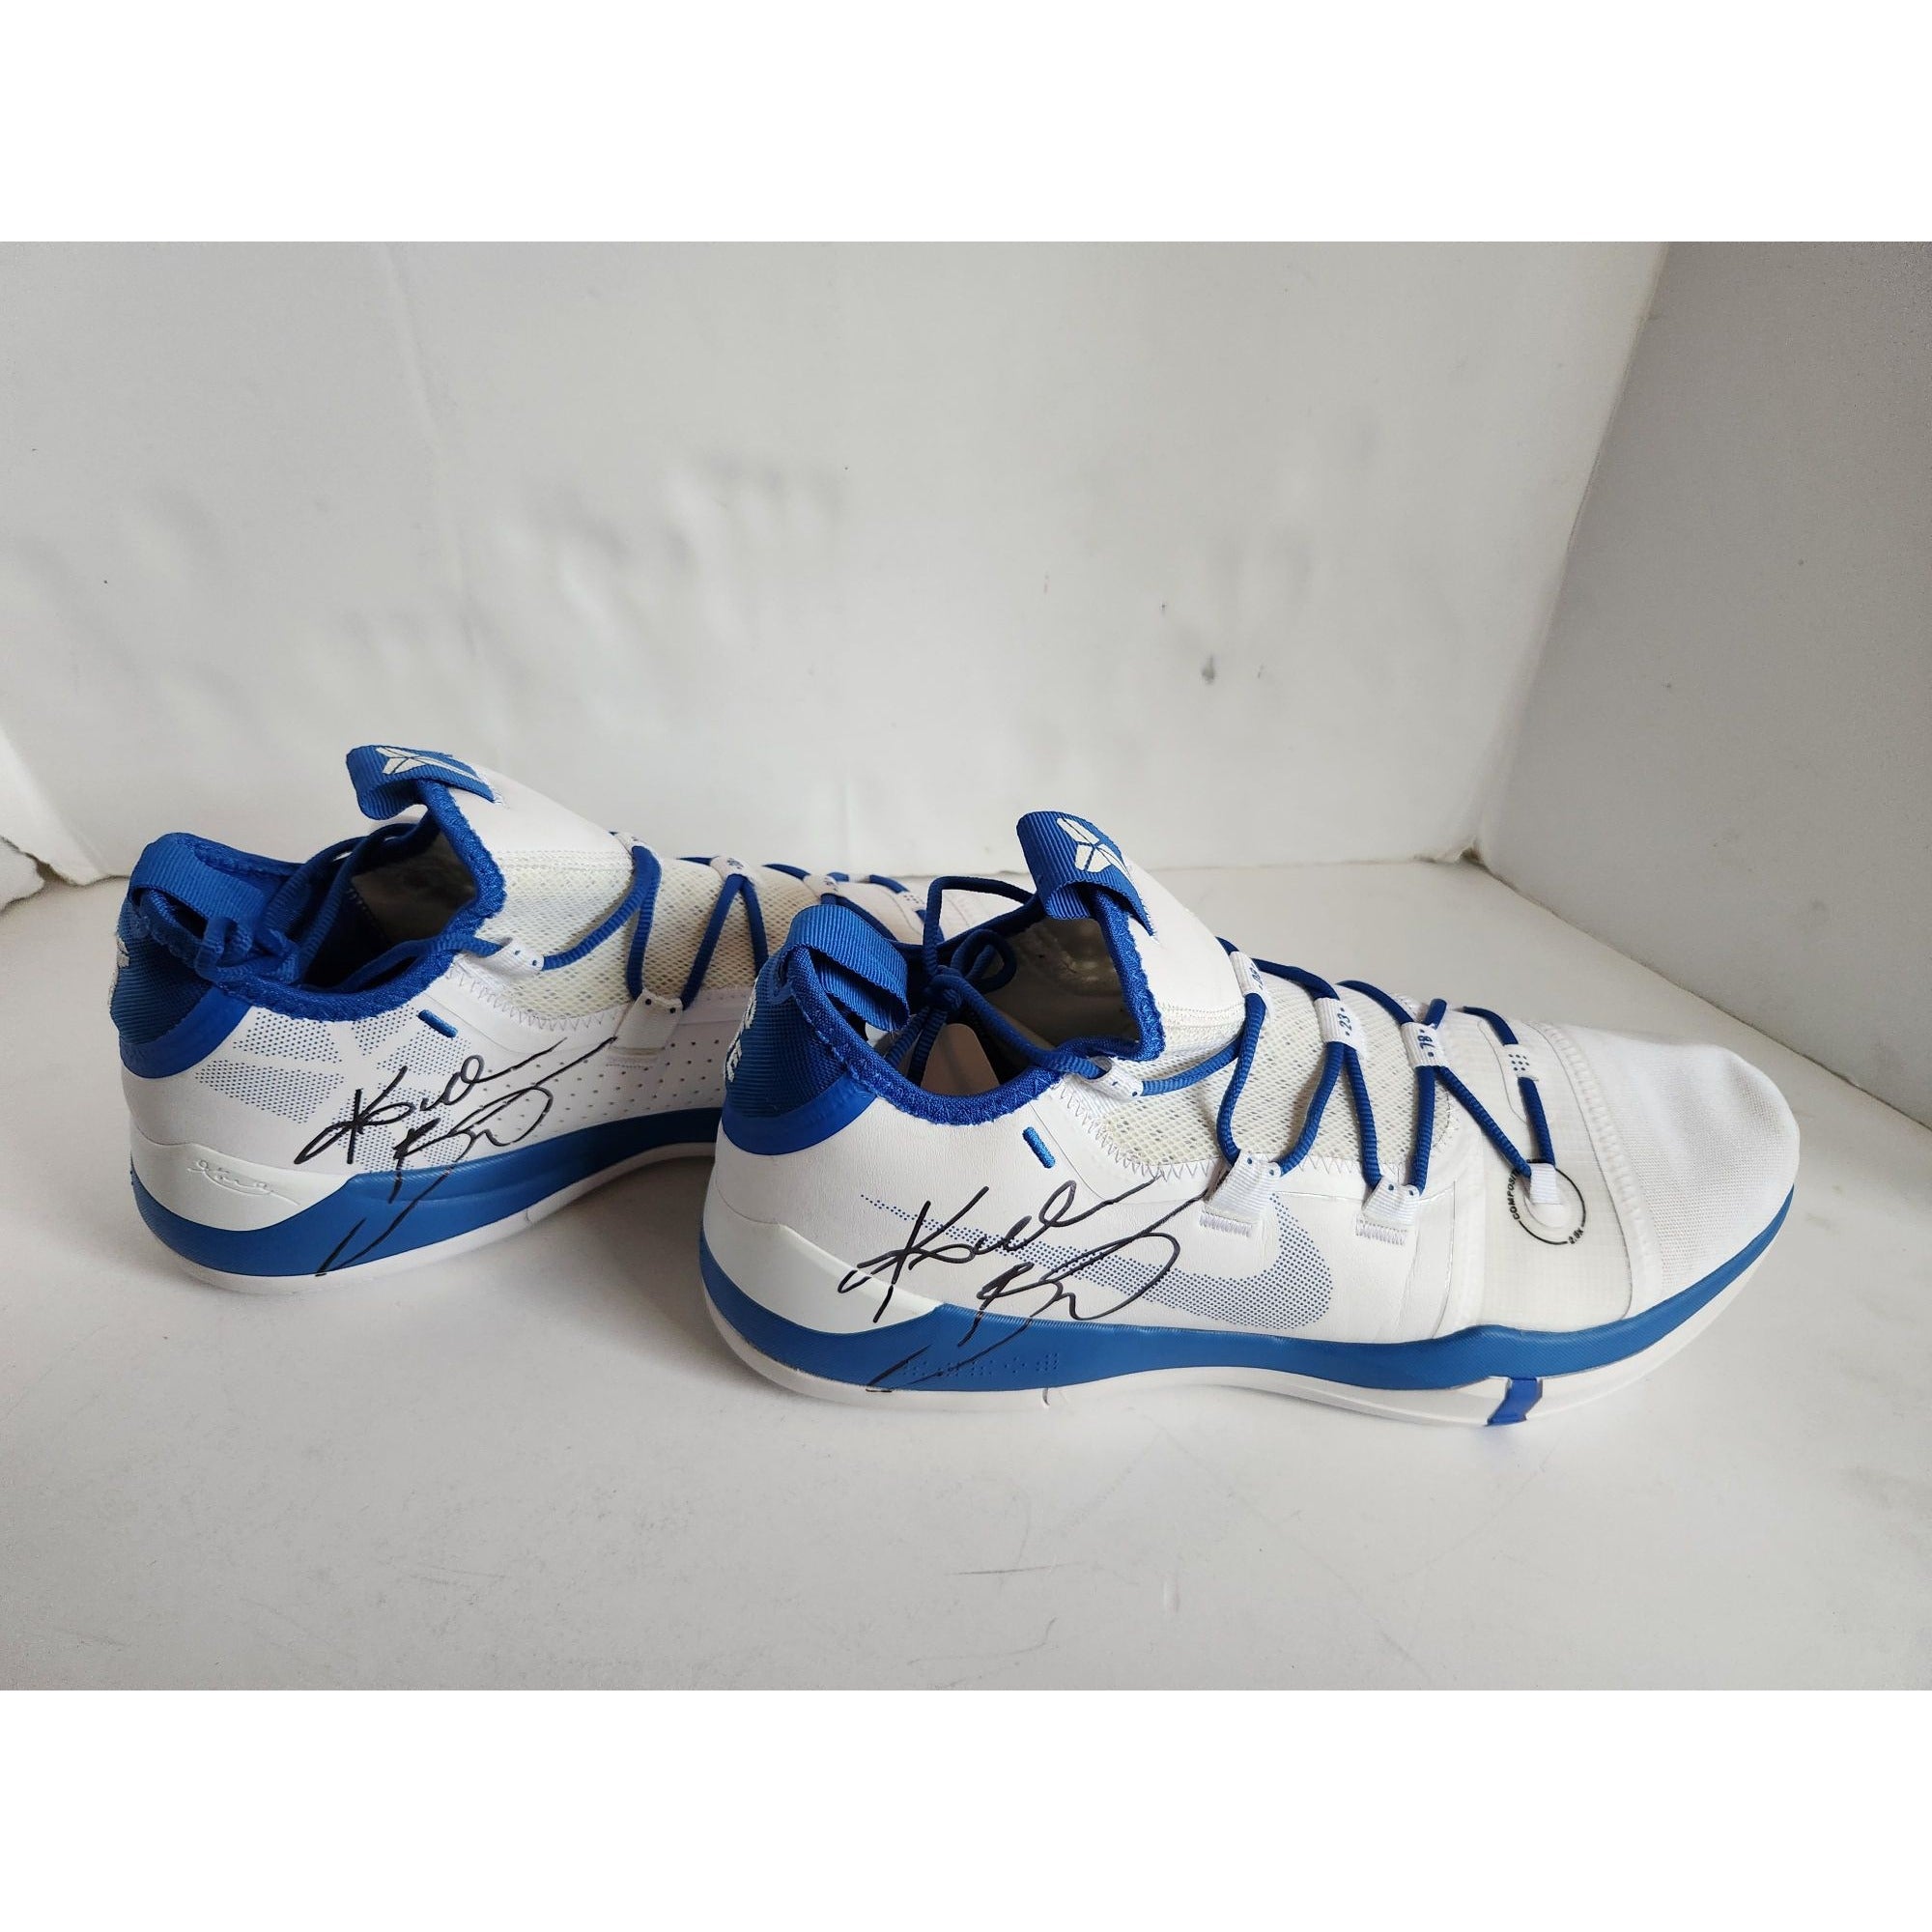 Kobe Bryant "The Mamba" Los Angeles Lakers game model Nike shoes signed with proof